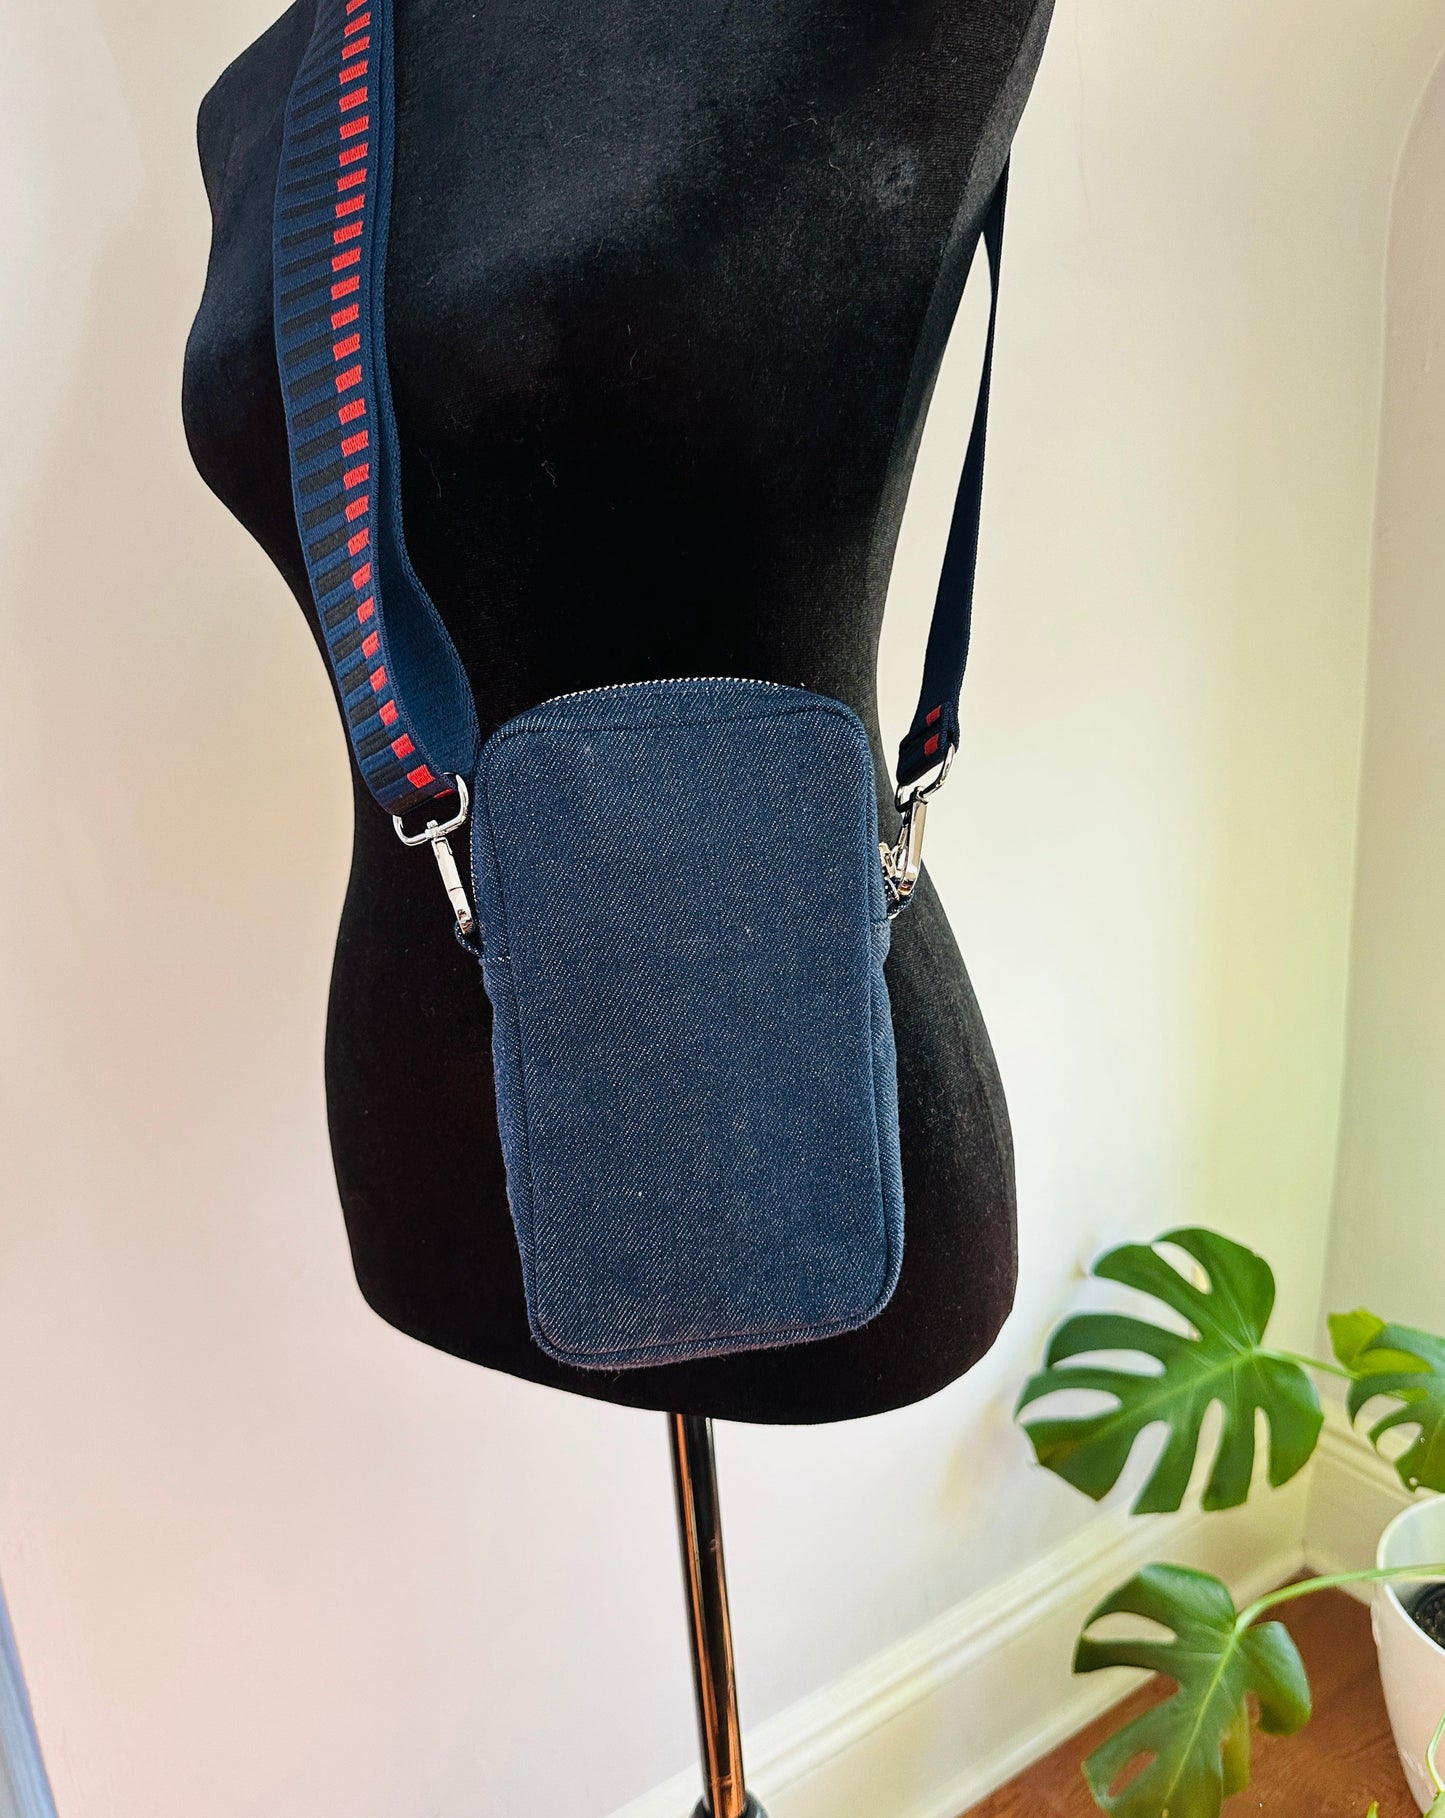 Wear it as a belt bag or crossbody bag! It carries everything you need while on the go.